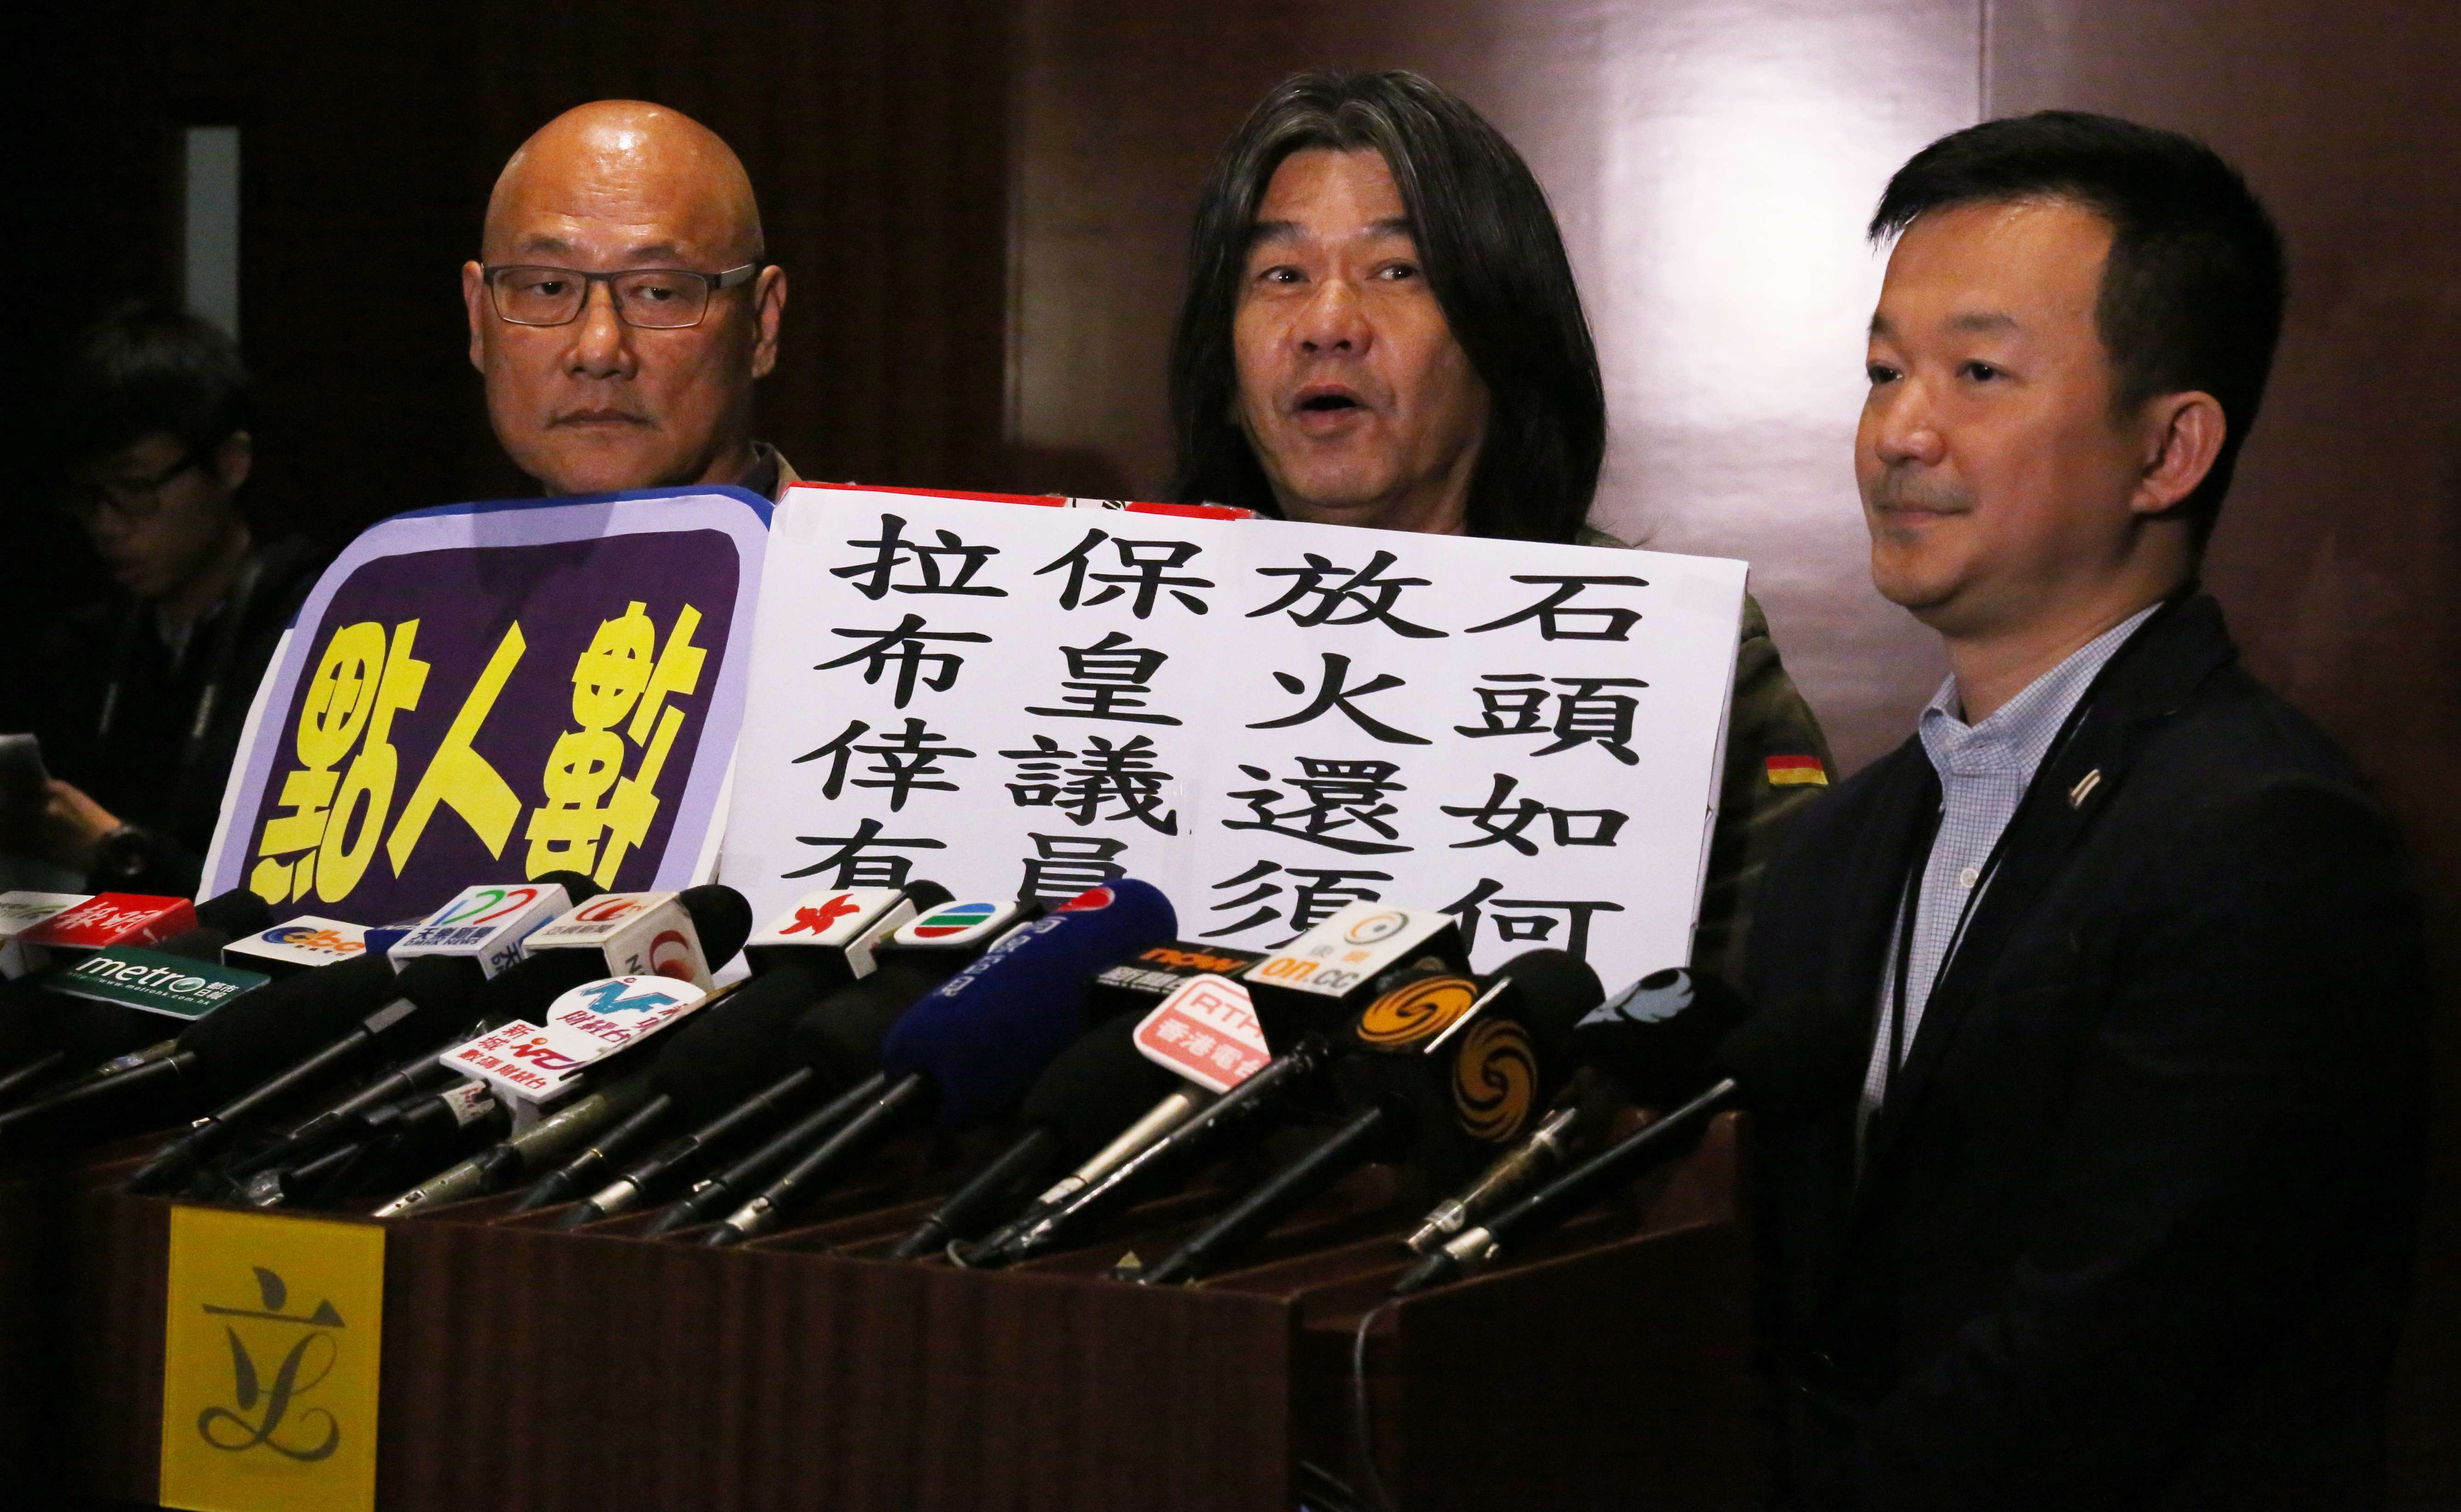 Albert Chan Wai-yip (left), "Long Hair" Leung Kwok-hung, and Raymond Chan Chi-chuen addressing the media after a Legco meeting on the copyright bill in January. Photo: Nora Tam